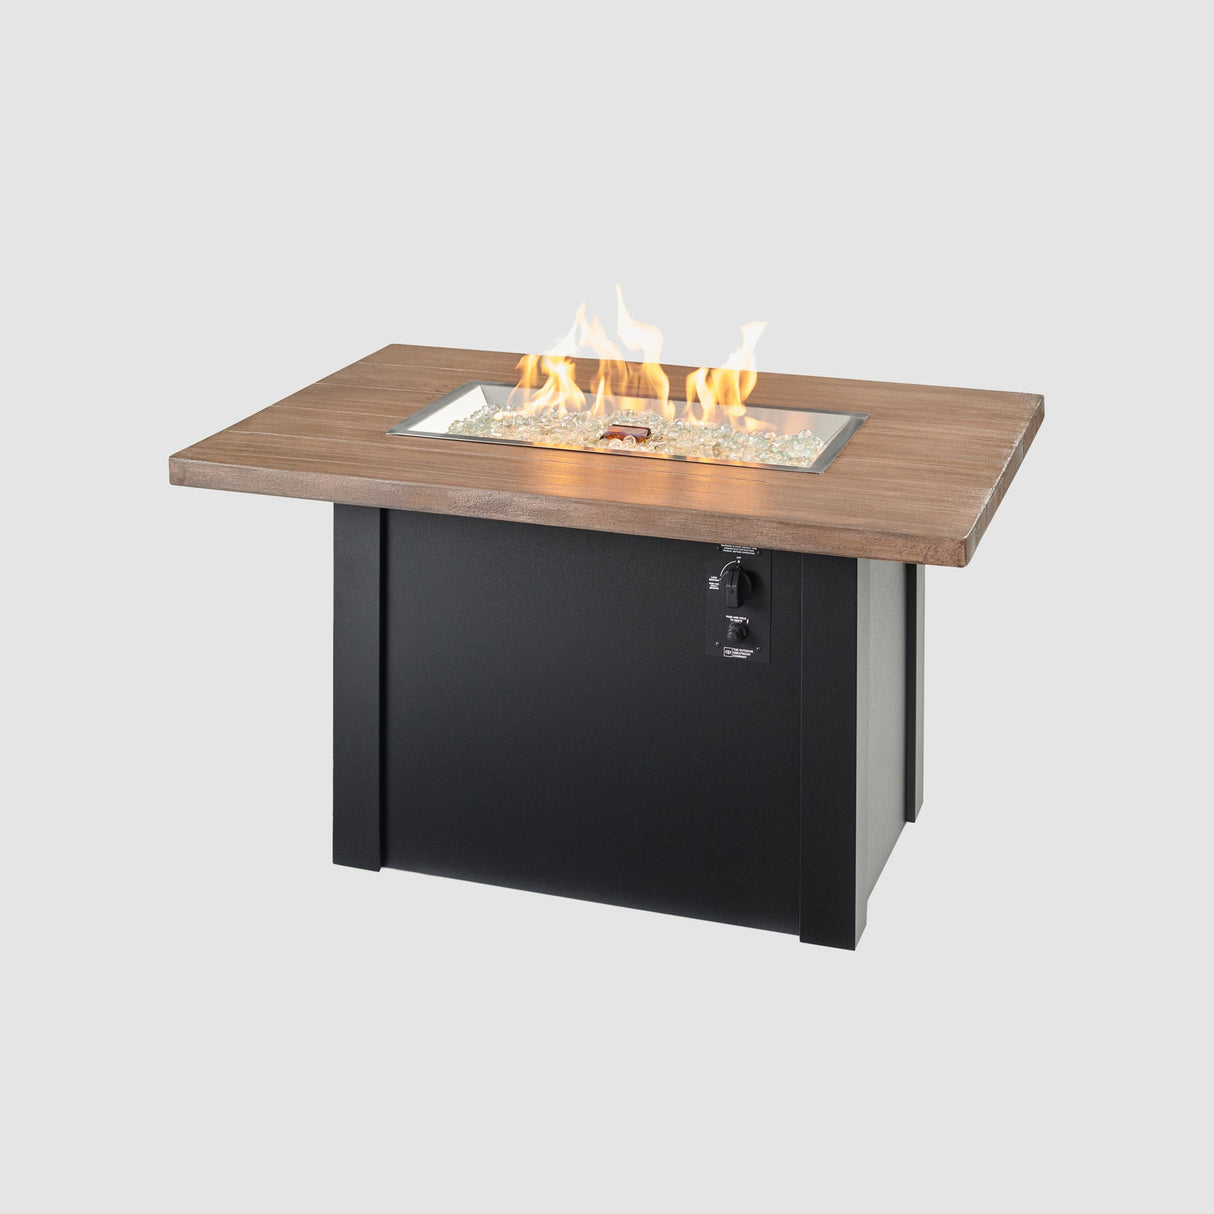 A large flame coming off the burner of a Havenwood Rectangular Gas Fire Pit Table with a Driftwood top and Luverne Black base